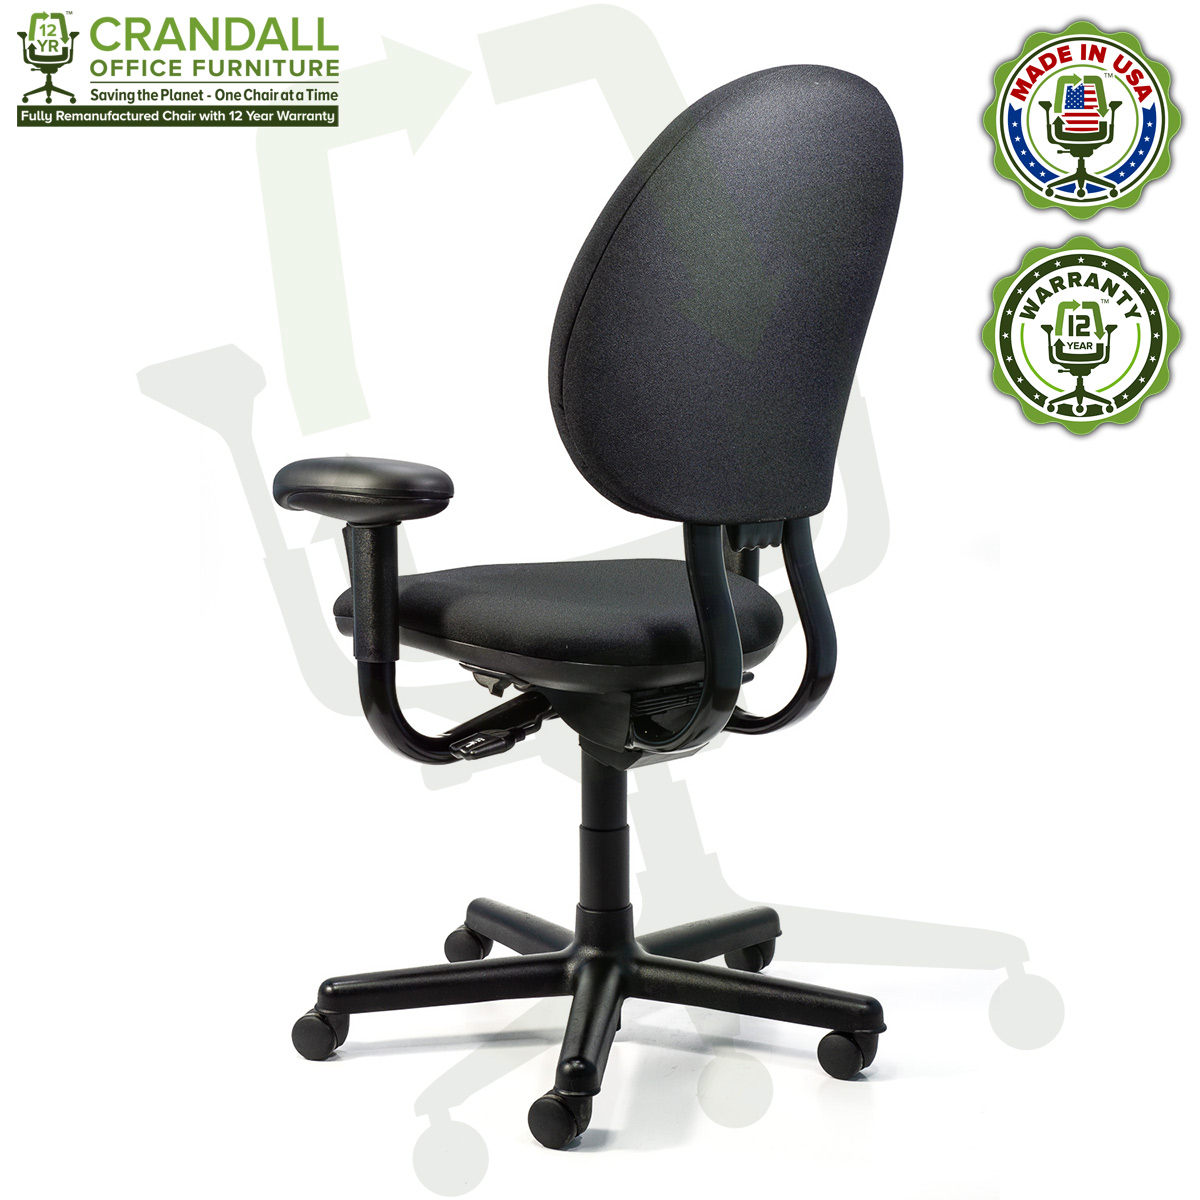 Crandall Office Furniture Remanufactured Steelcase Criterion Chair with 12 Year Warranty - 04